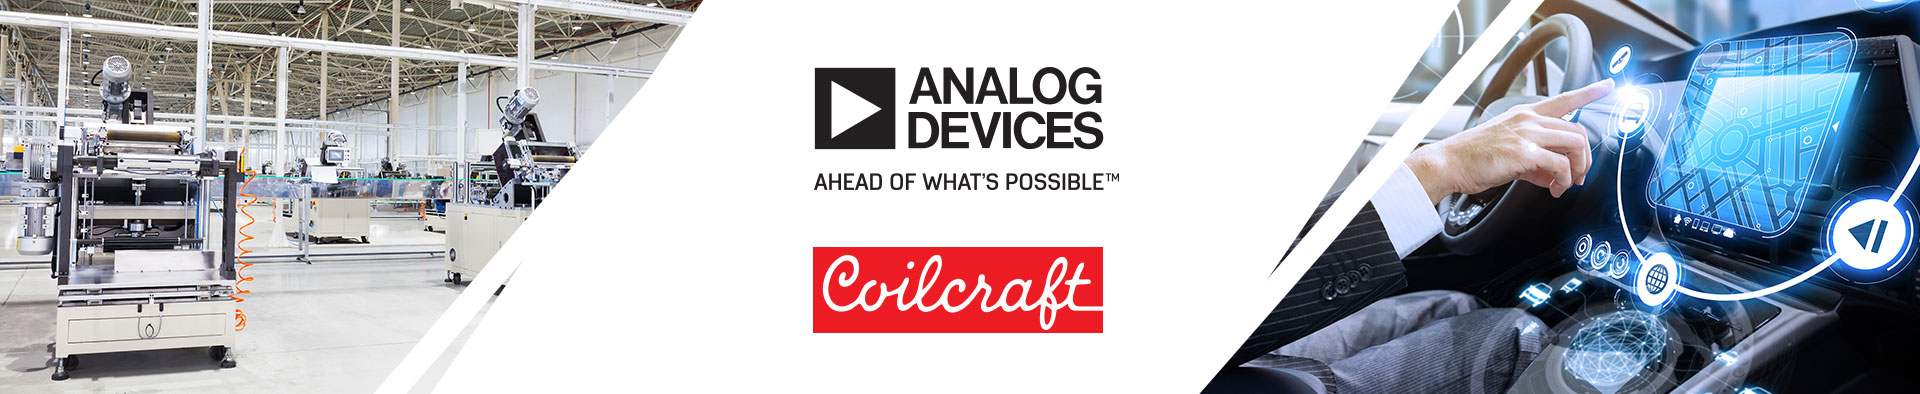 Analog Devices - Coilcraft